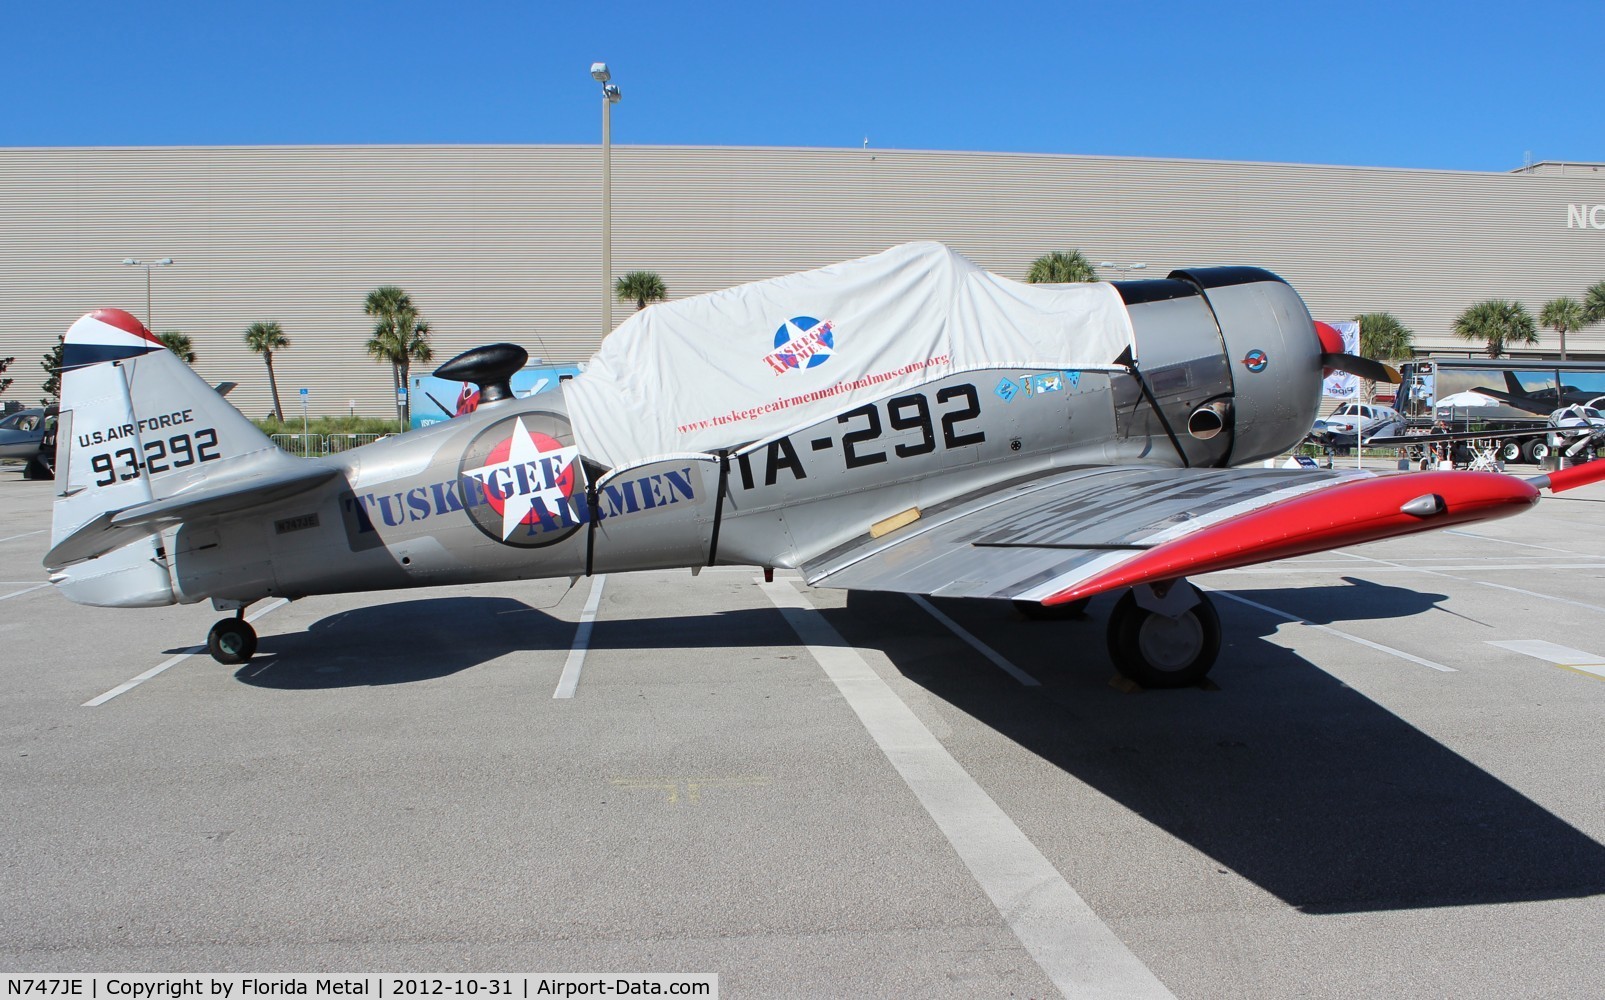 N747JE, 1958 North American AT-6G Texan C/N 168-394 (49-3292), Tuskegee Airmen T-6 at Orange County Convention Center Orlando FL for NBAA